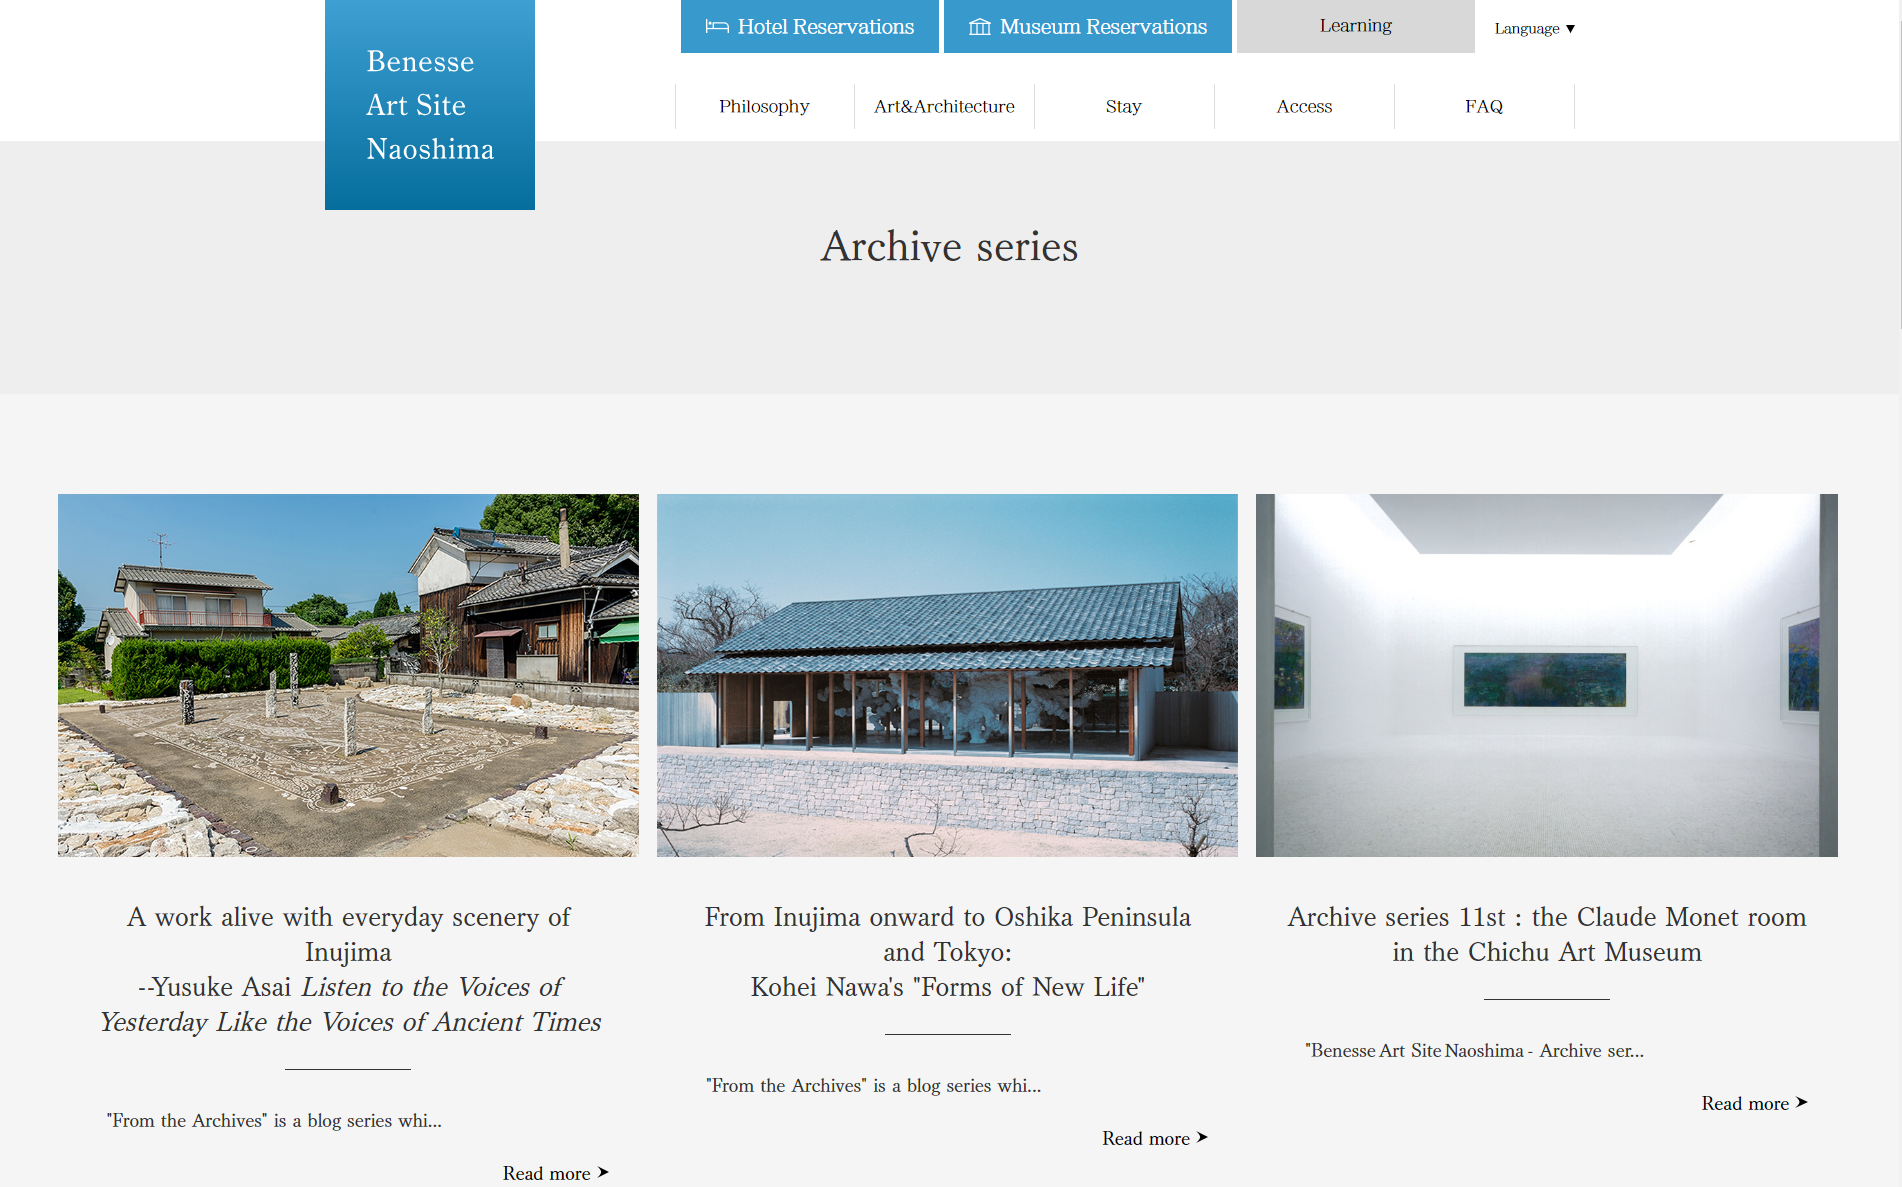 Benesse art site naoshima archive 1.png